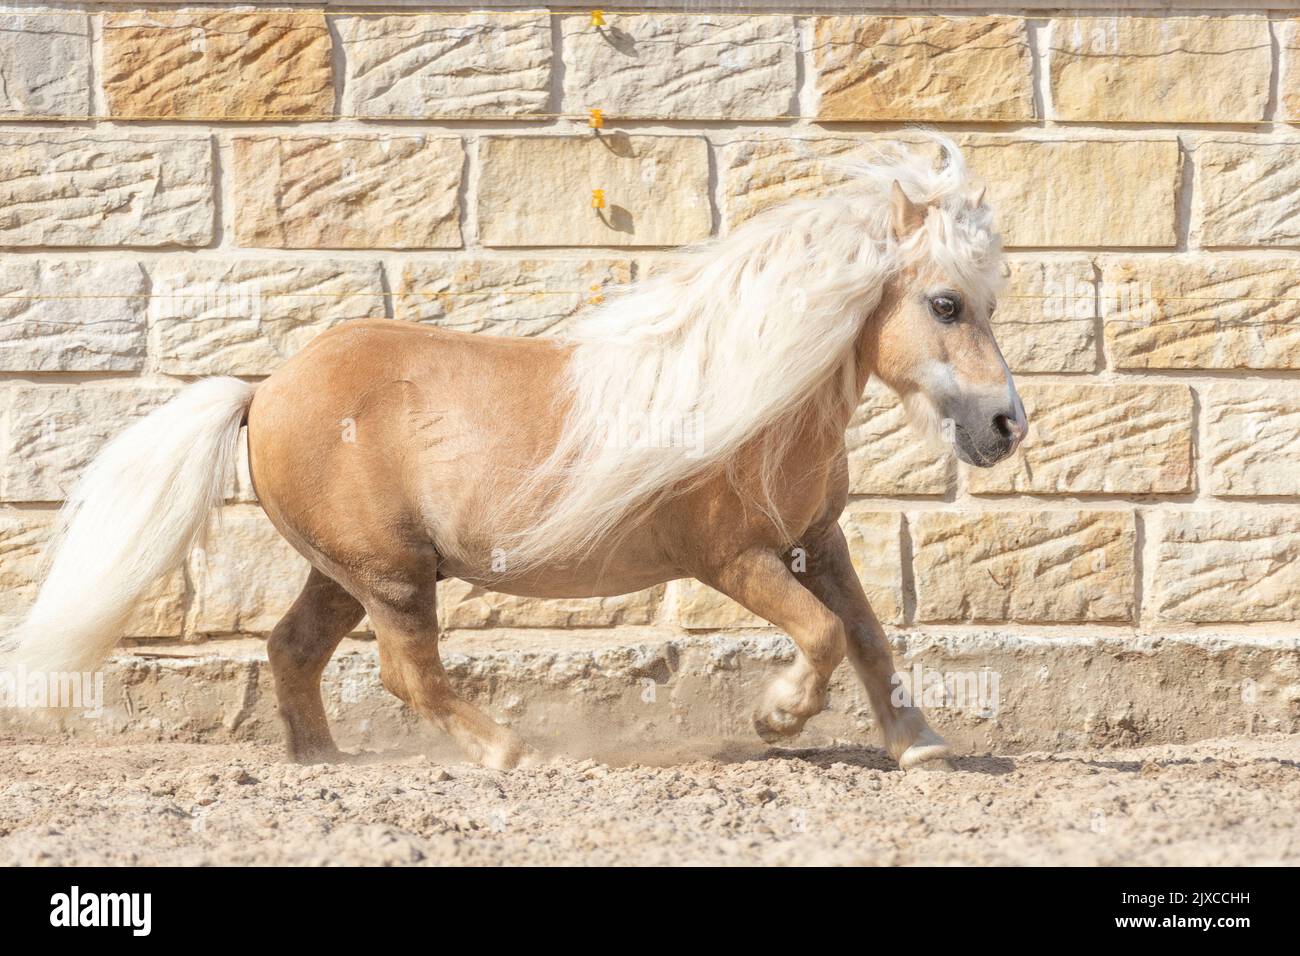 American Miniature Horse. Palomino stallion galloping on sand with wall in background. Germany Stock Photo